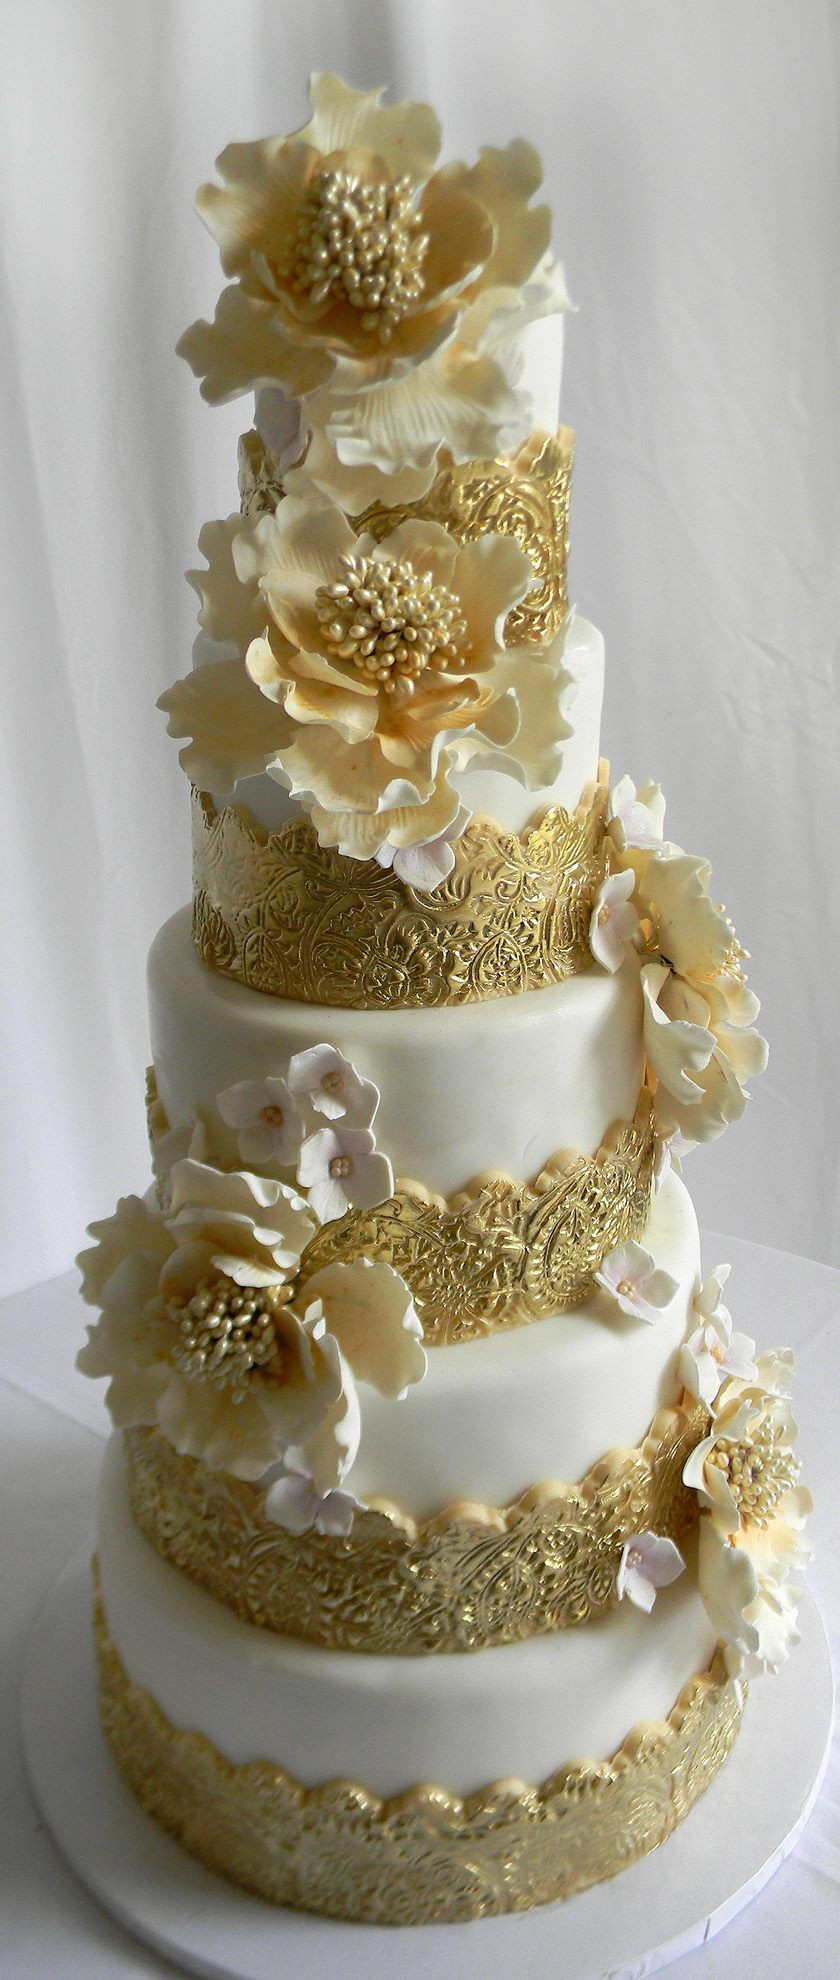 6 Layer Wedding Cakes
 All gold and white 6 tier wedding cake